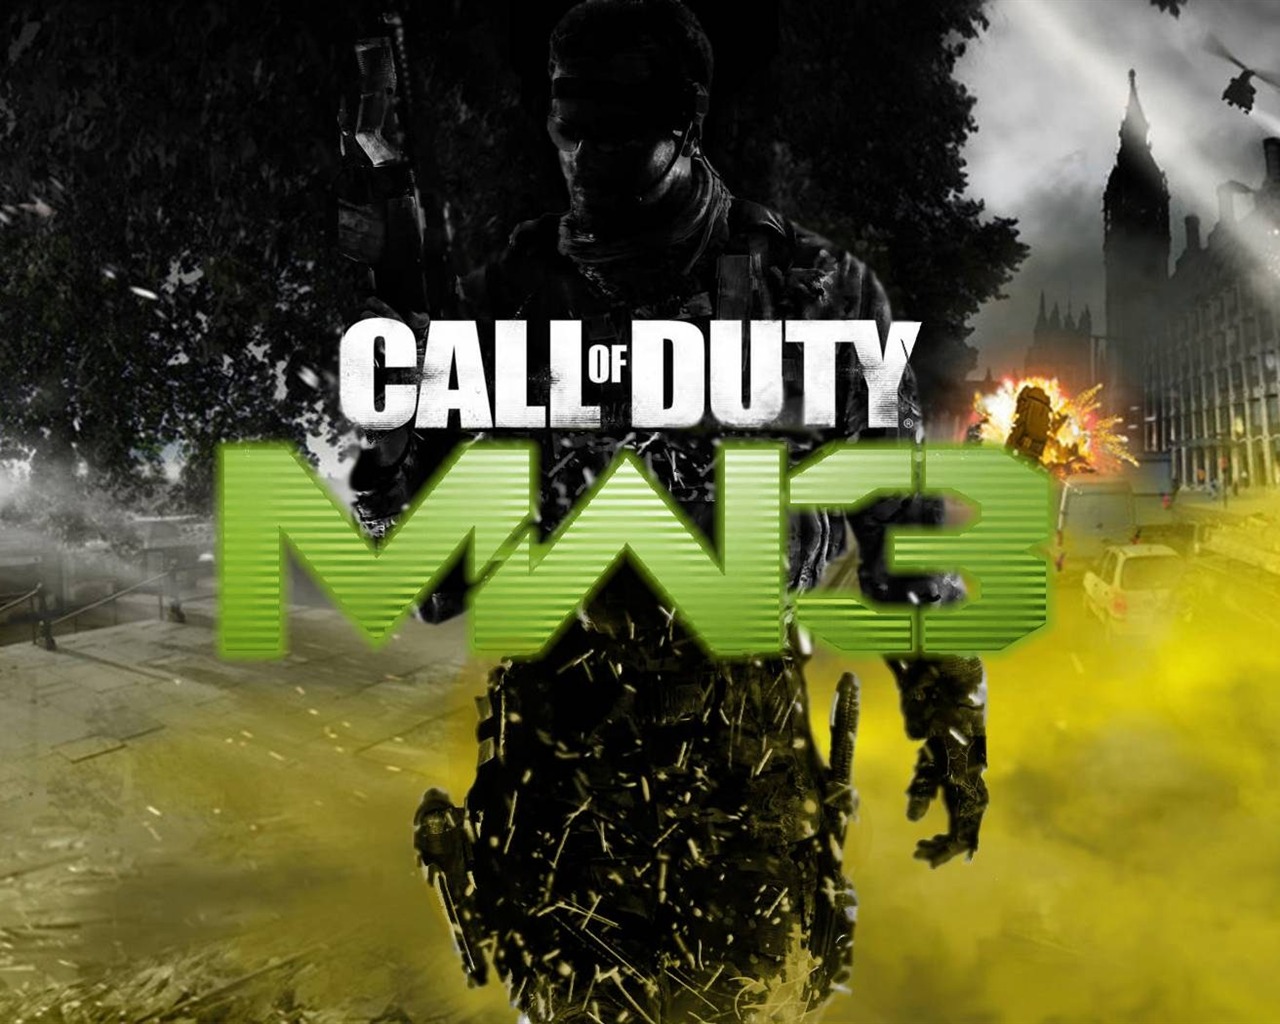 Call of Duty: MW3 HD wallpapers #4 - 1280x1024